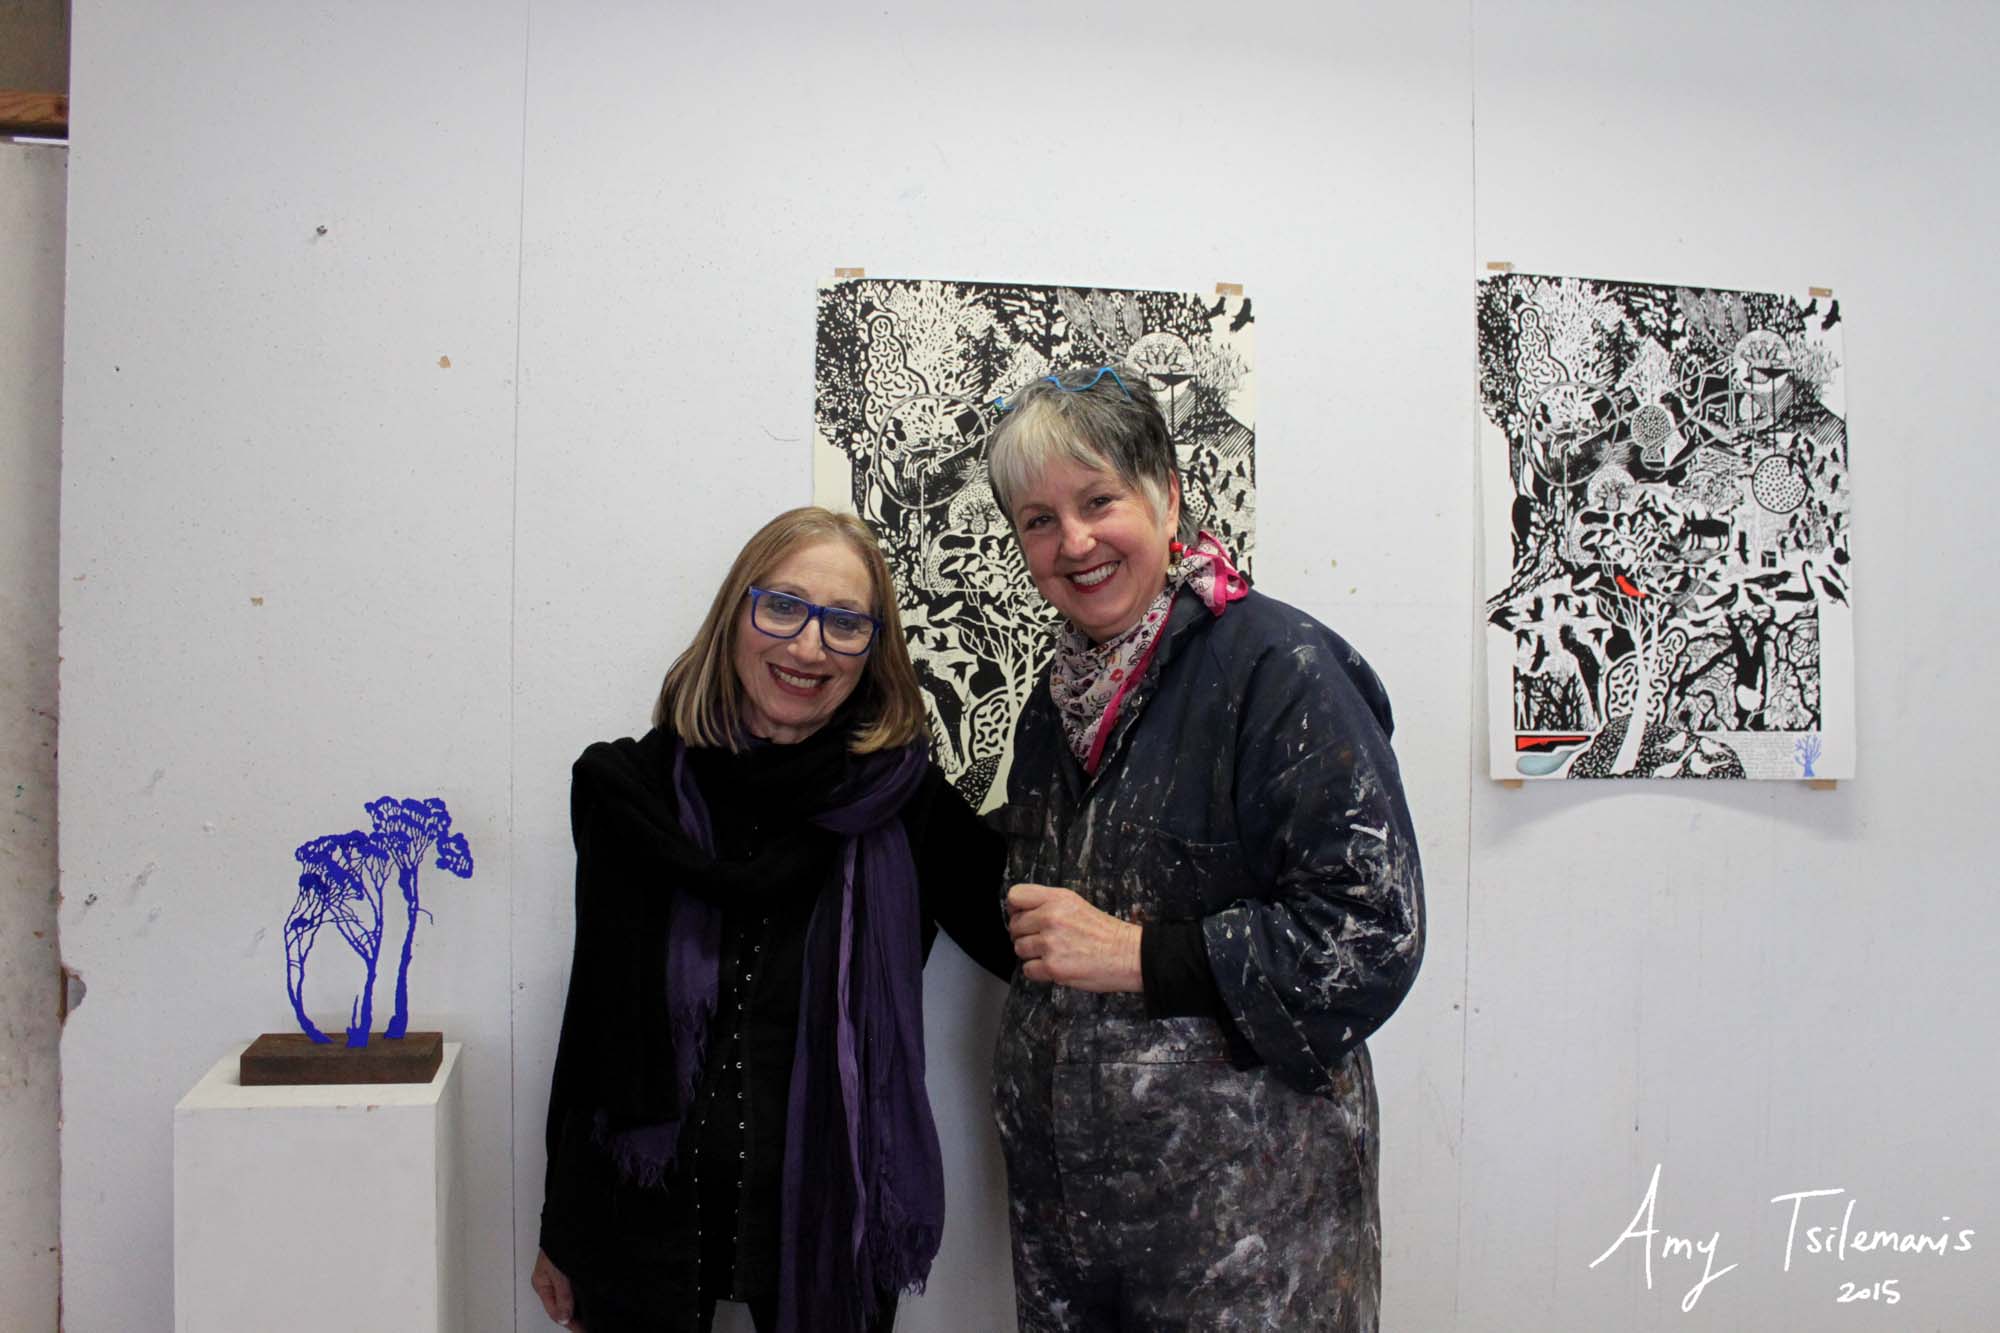 Judy Holding in her studio with Dianna Gold (co-curator of the 37º 48' S: artists navigate MELBOURNE project)